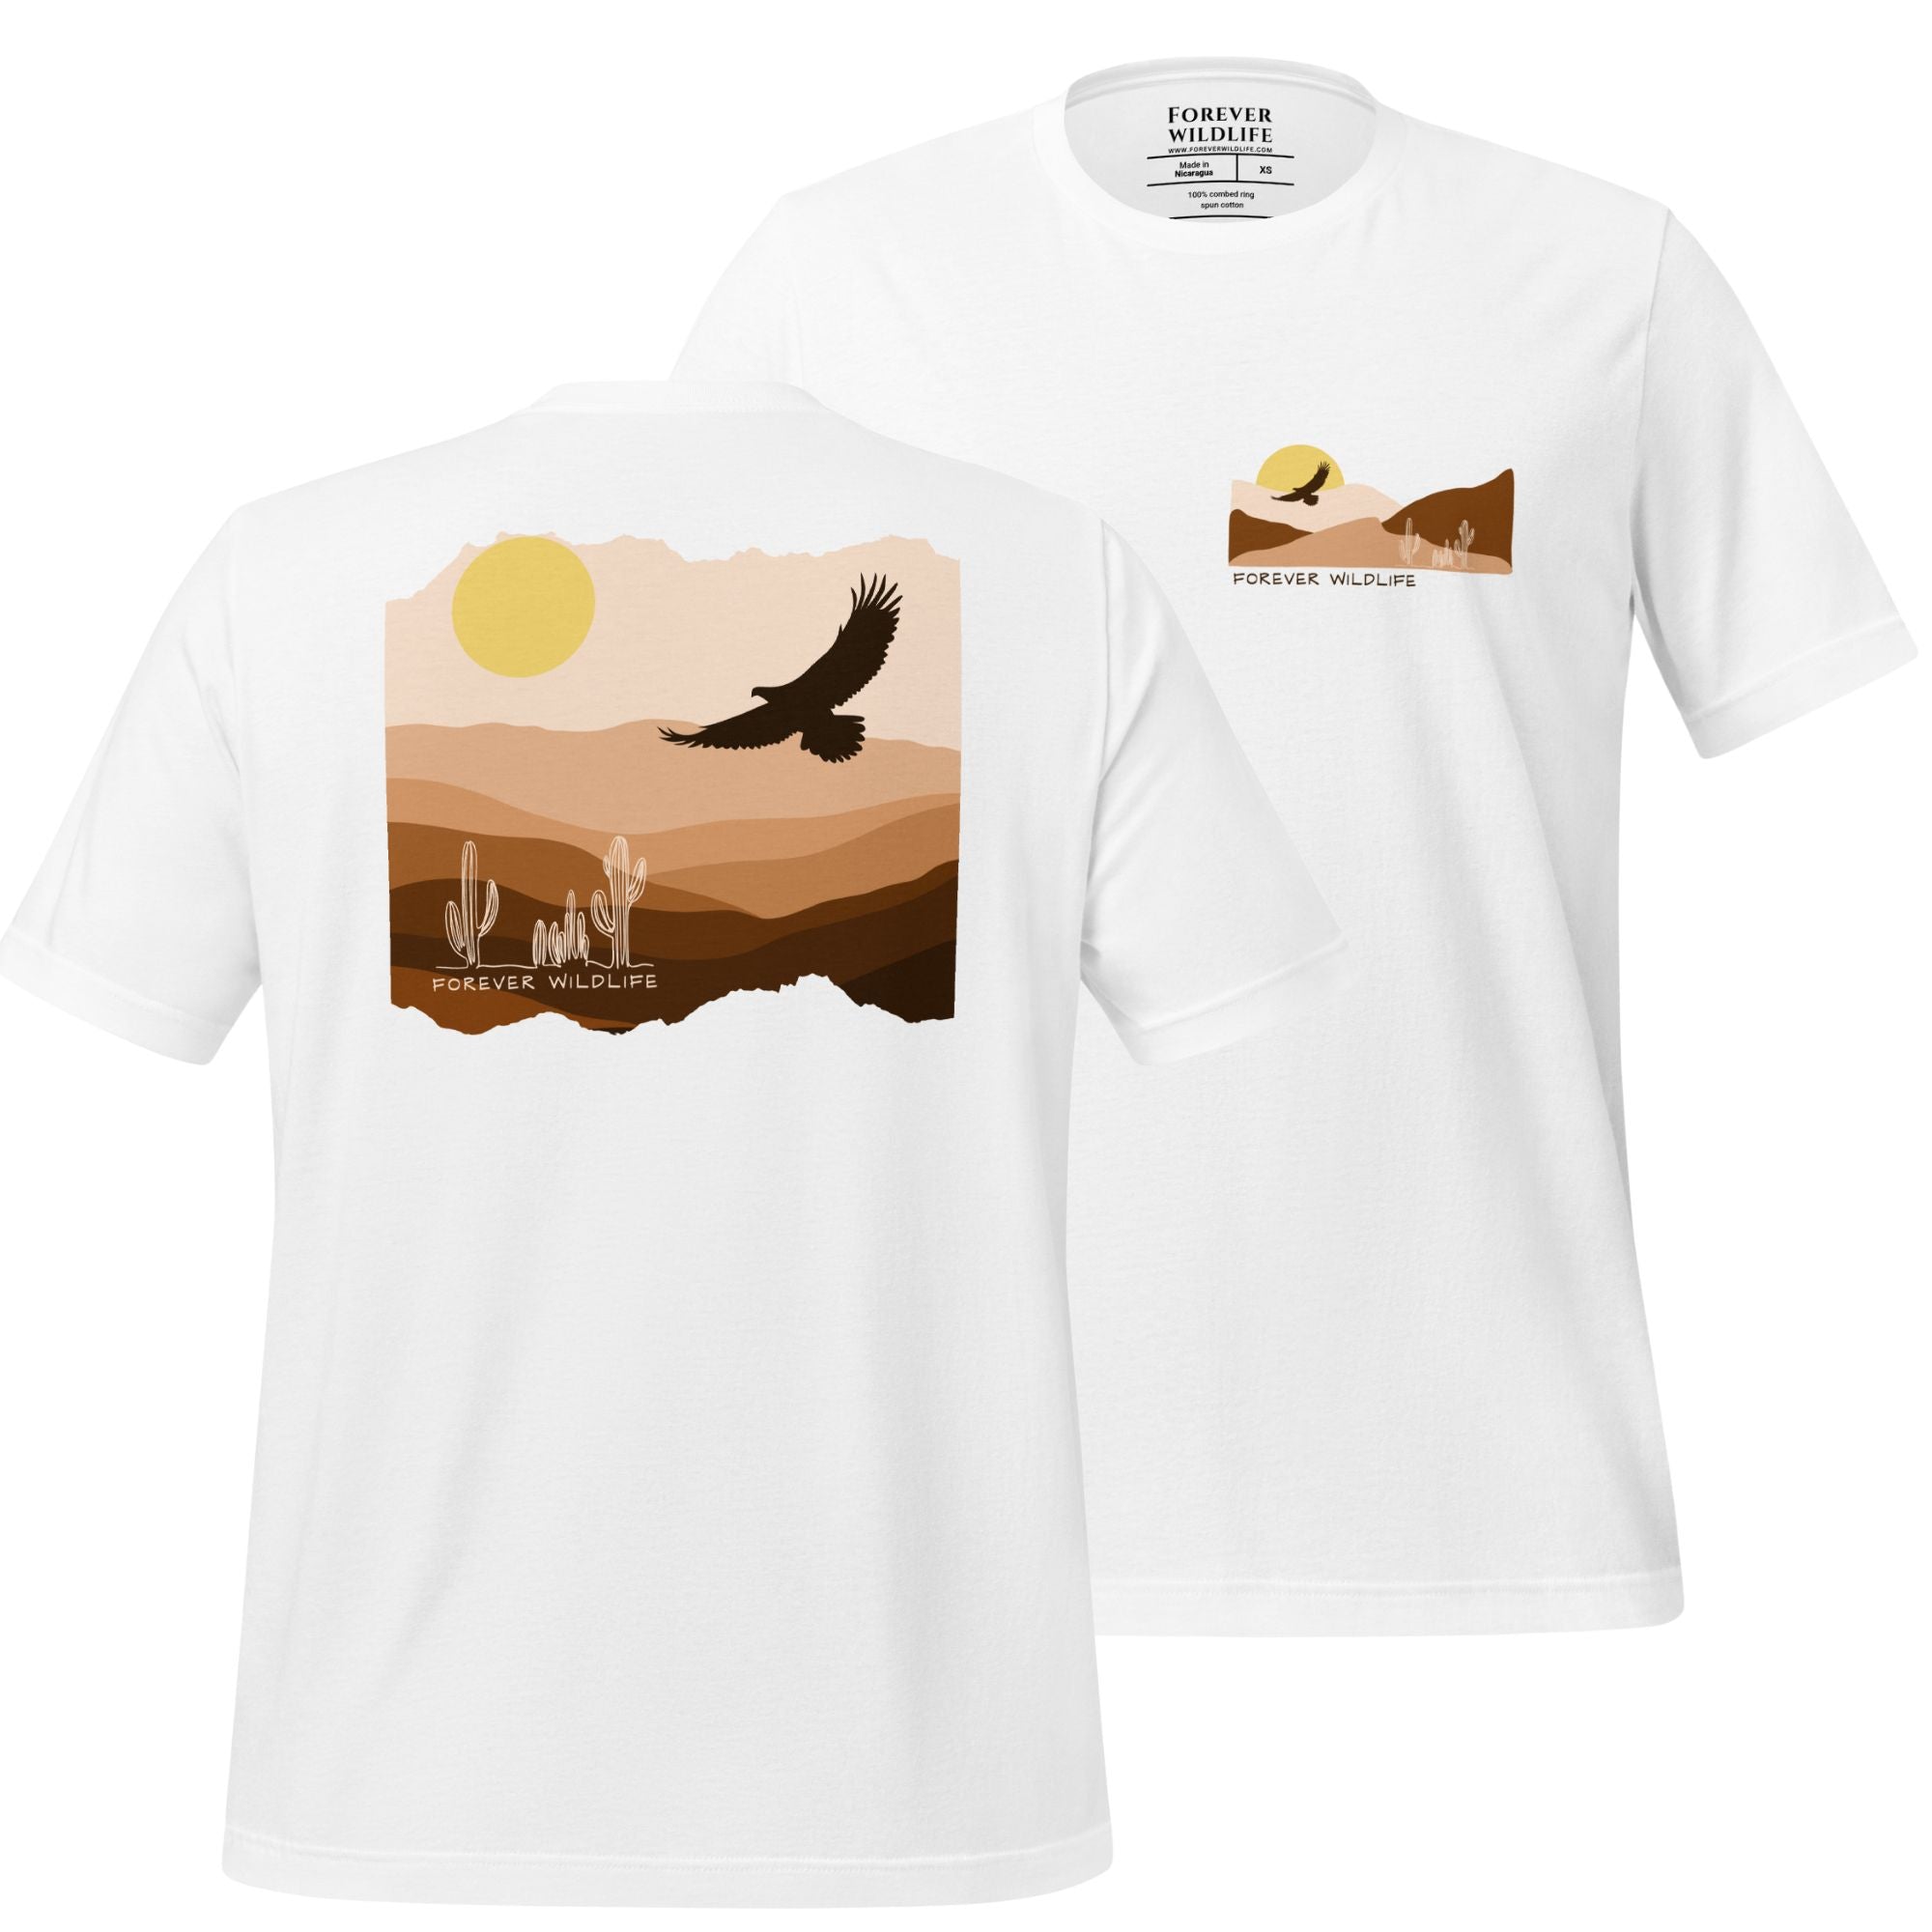 Eagle T-shirt, beautiful white Eagle t-shirt with eagle soaring over the desert part of Wildlife tshirts & Clothing collection.